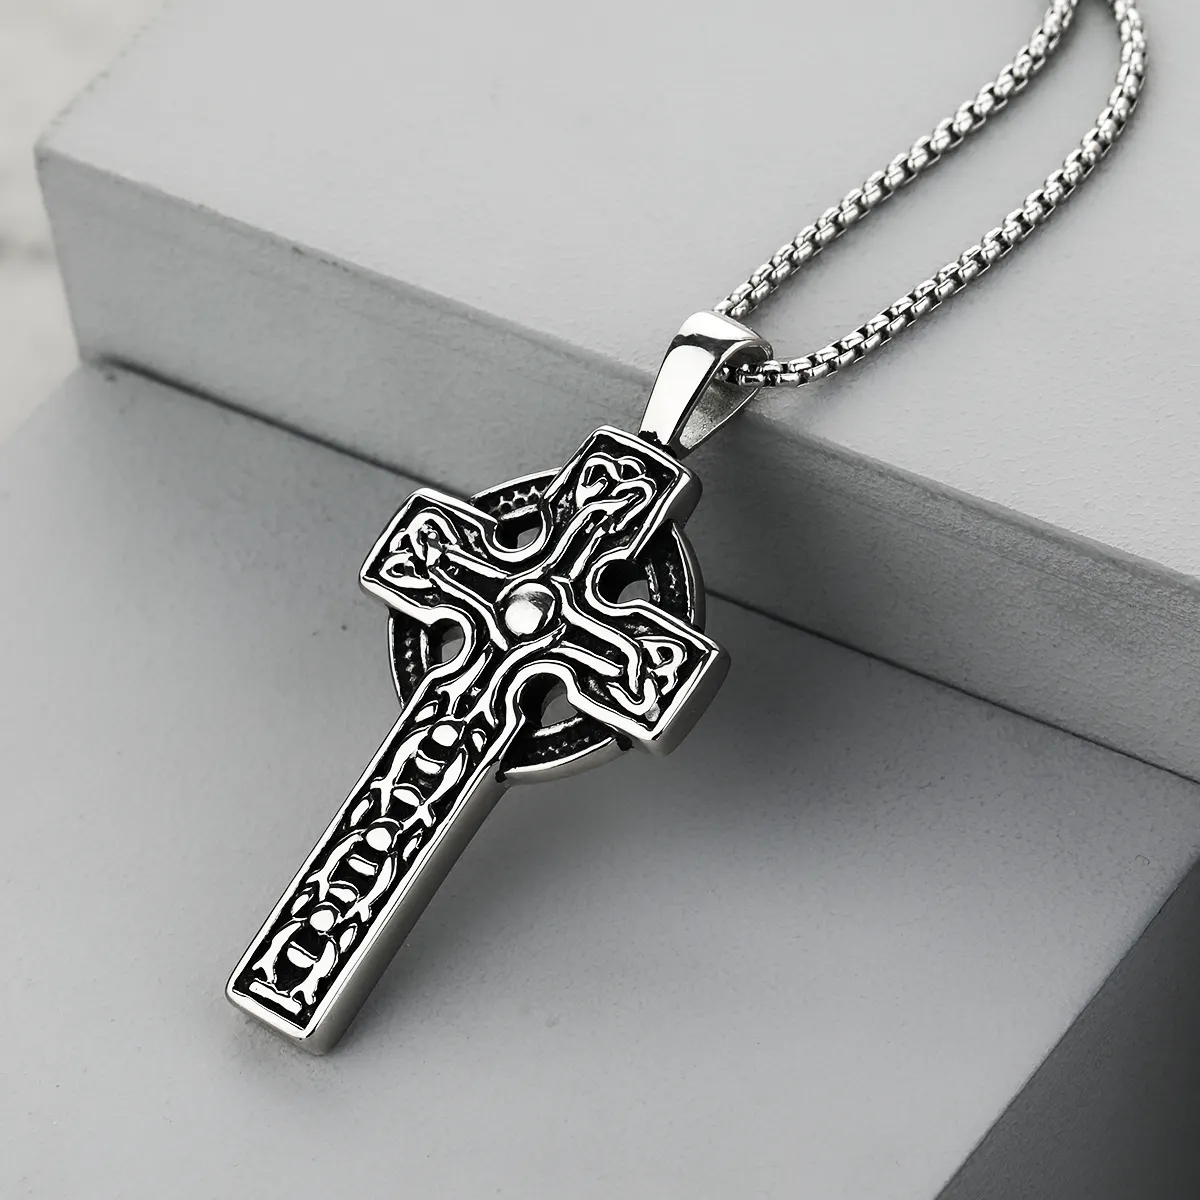 ELIO Fashion Jesus Crystal Pendant Necklace Men Gold Silver Black Blue Stainless Steel Cross Necklace Women Fashion Jewelry Gift